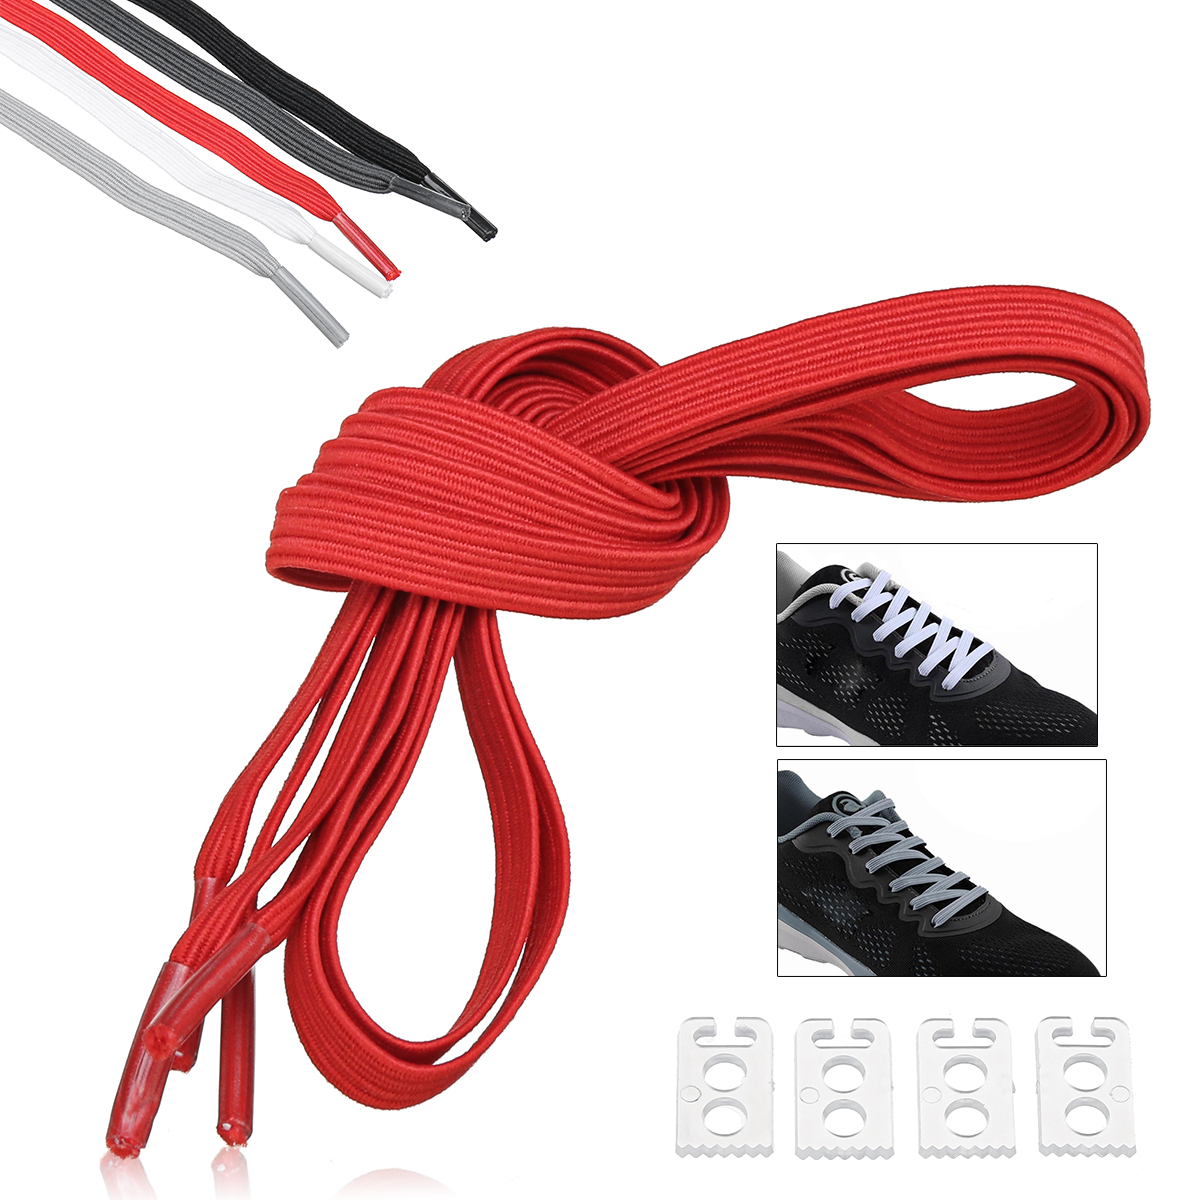 2Pcs-100cm-Elastic-No-Tie-Shoelaces-Lazy-Free-Tie-Sneaker-Laces-With-Buckles-Sports-Running-1470098-9